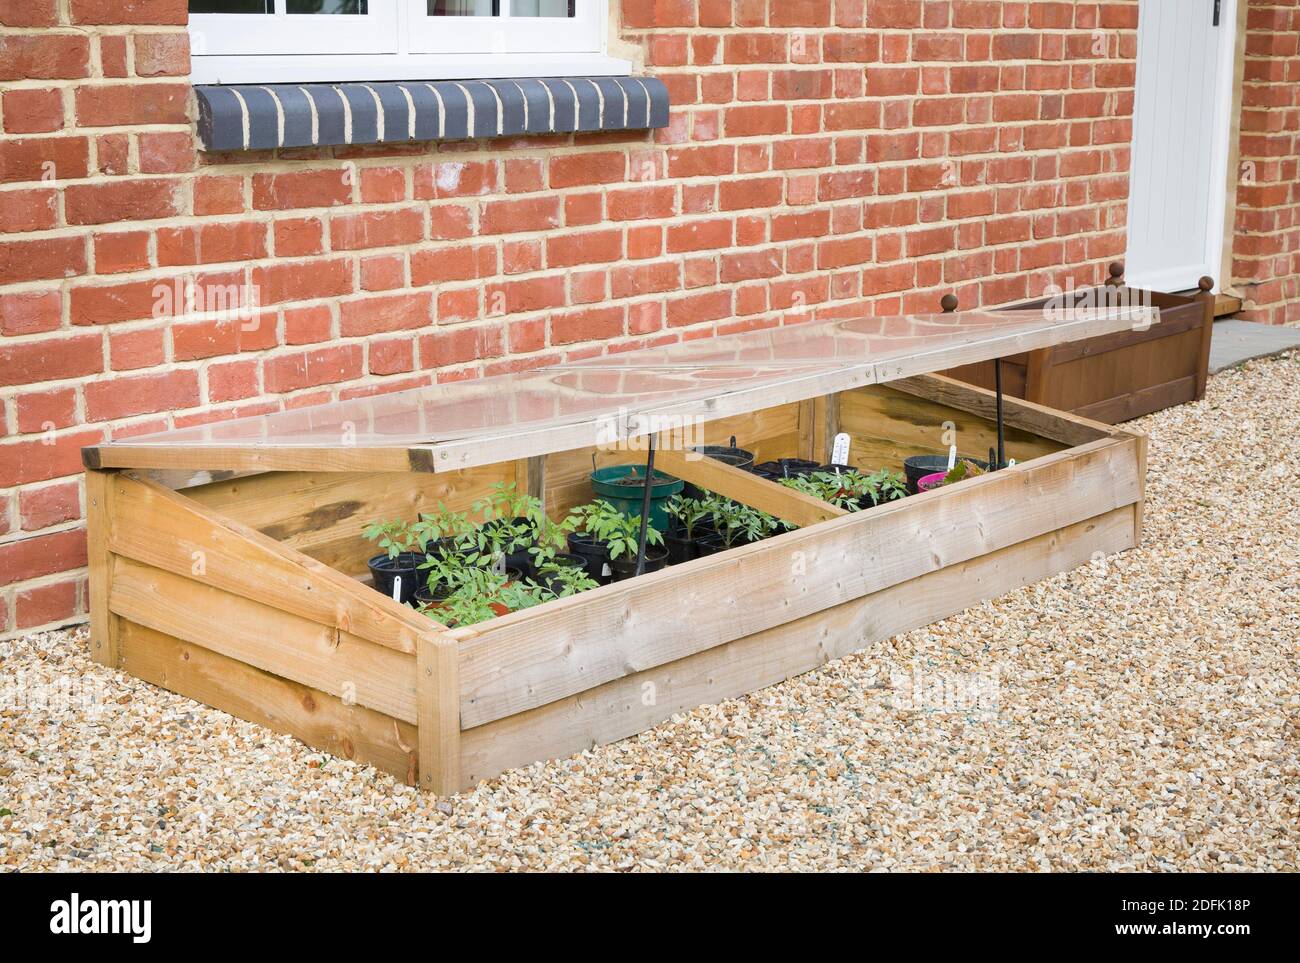 Cold frame with vegetable (tomato) plants against a wall in a UK garden in spring Stock Photo